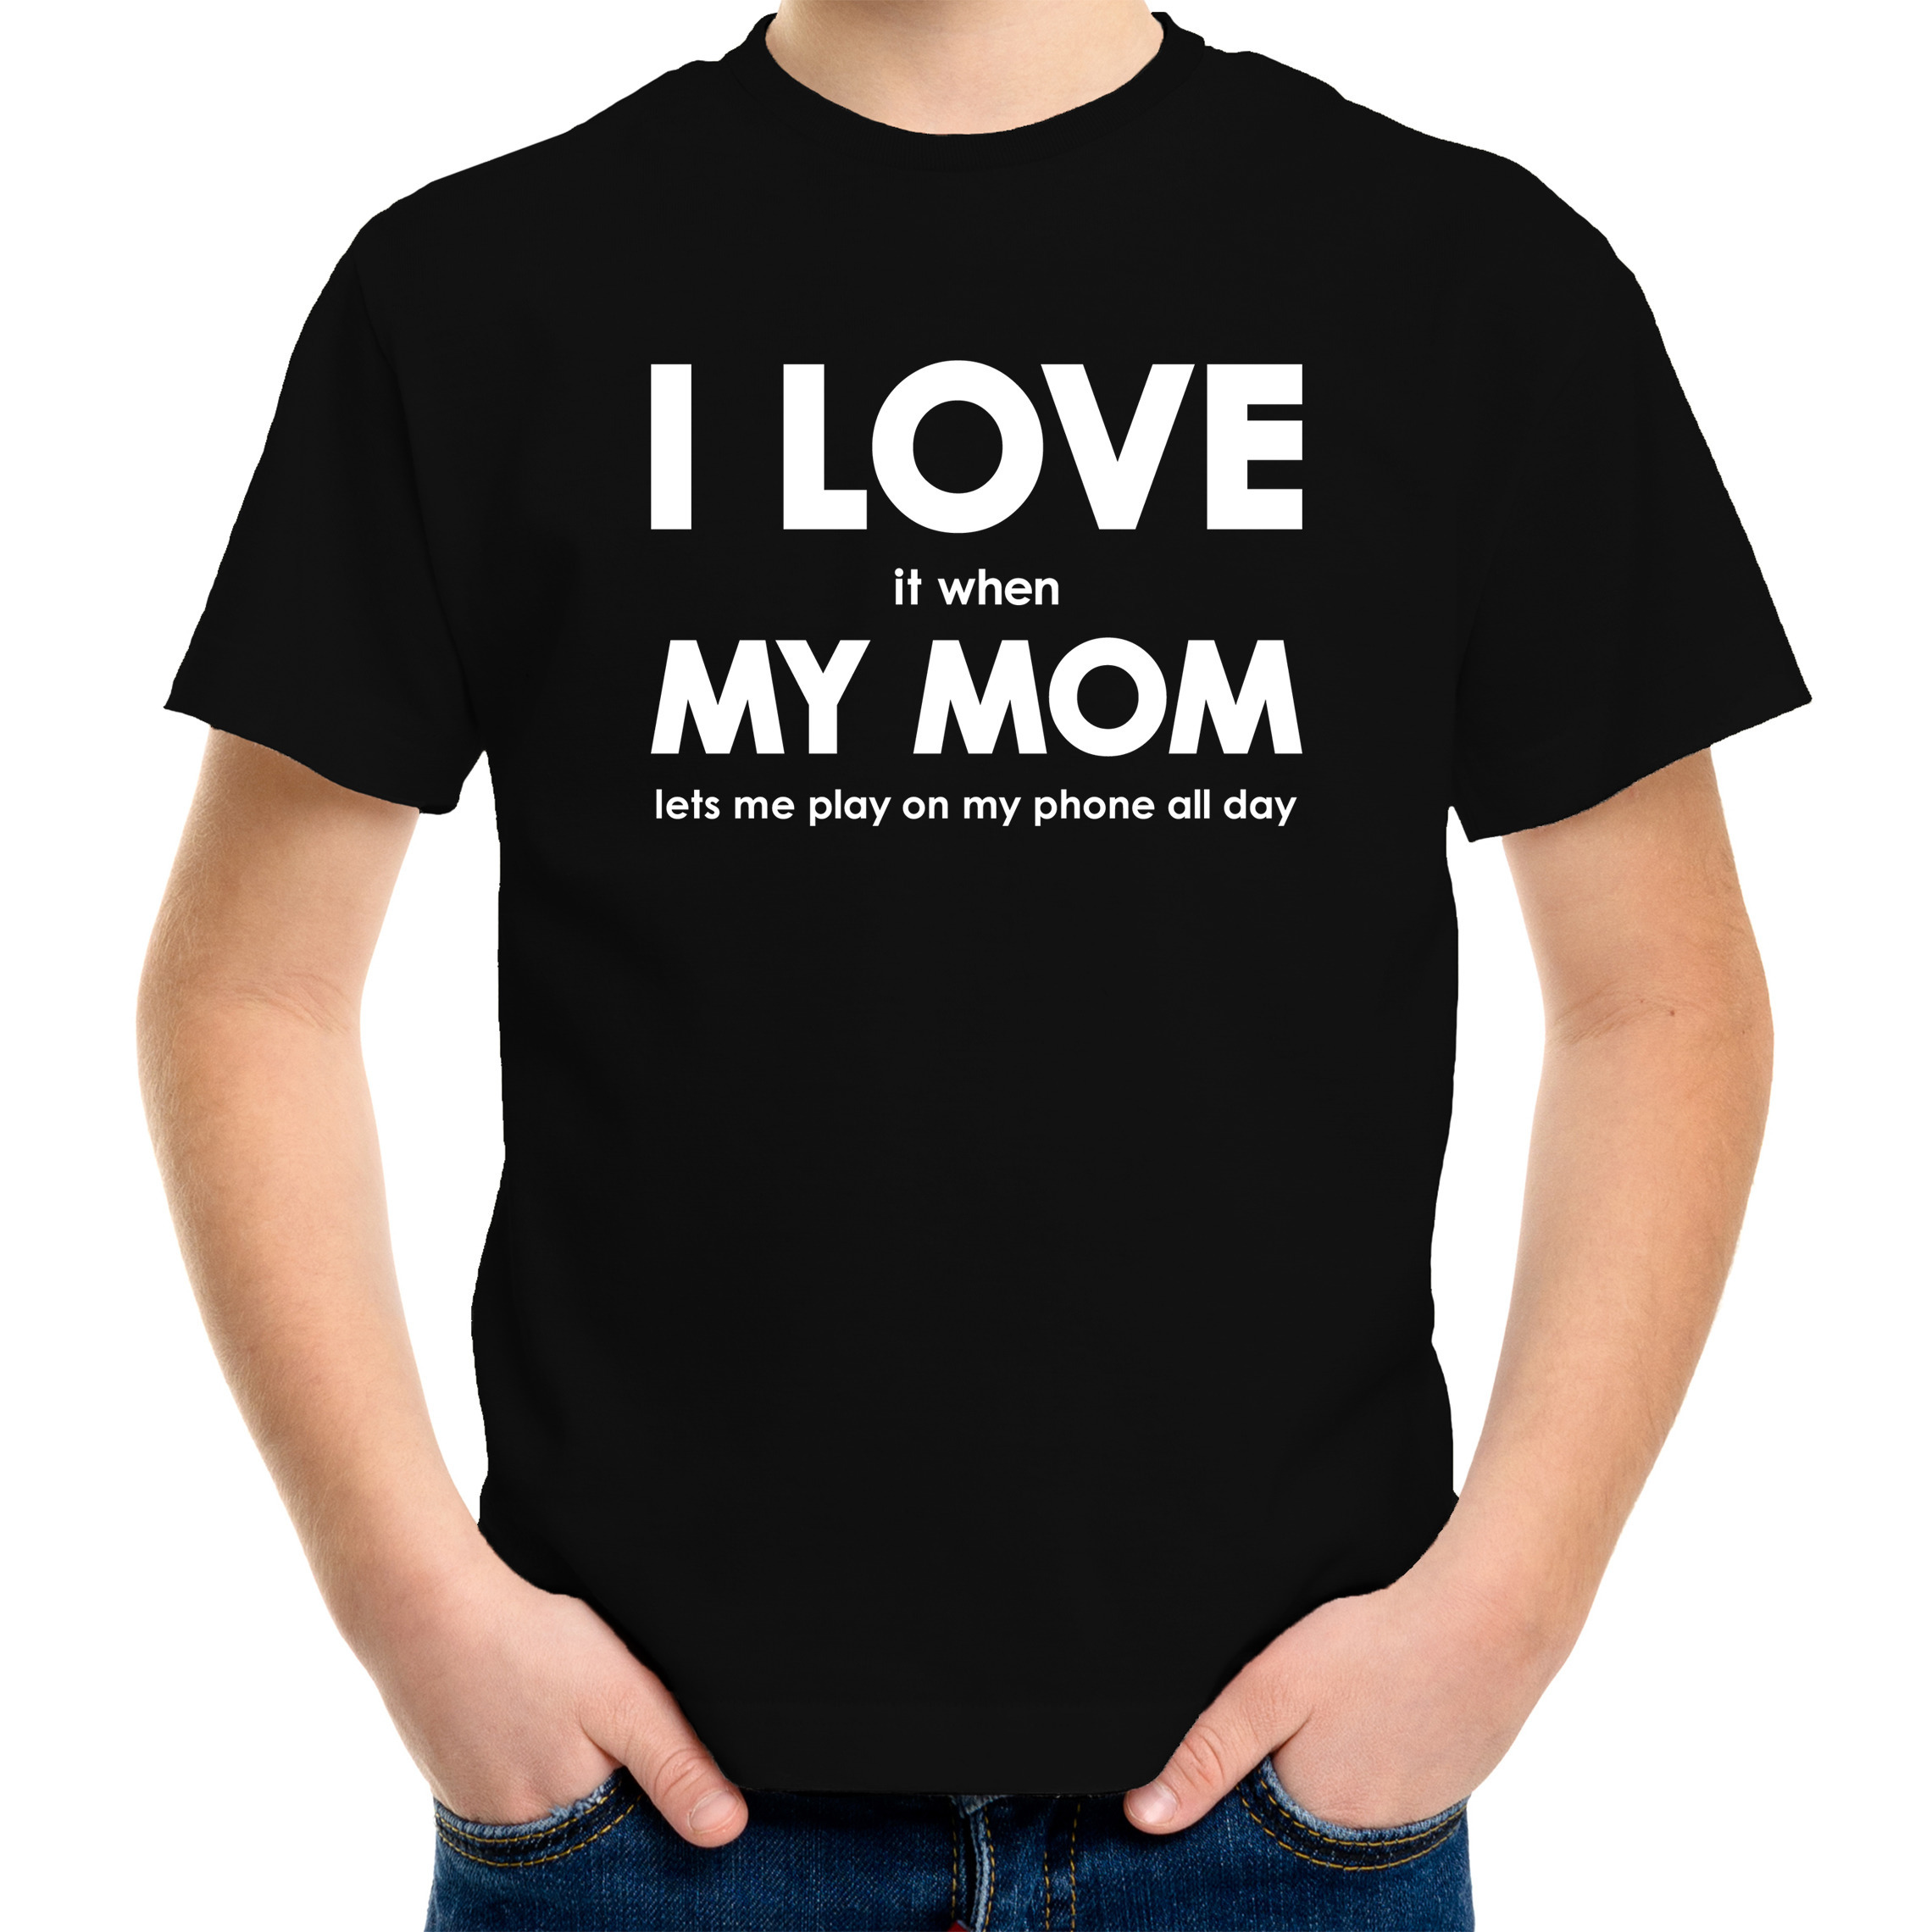 I love it when my mom lets me play on my phone all day t-shirt zwart voor kids